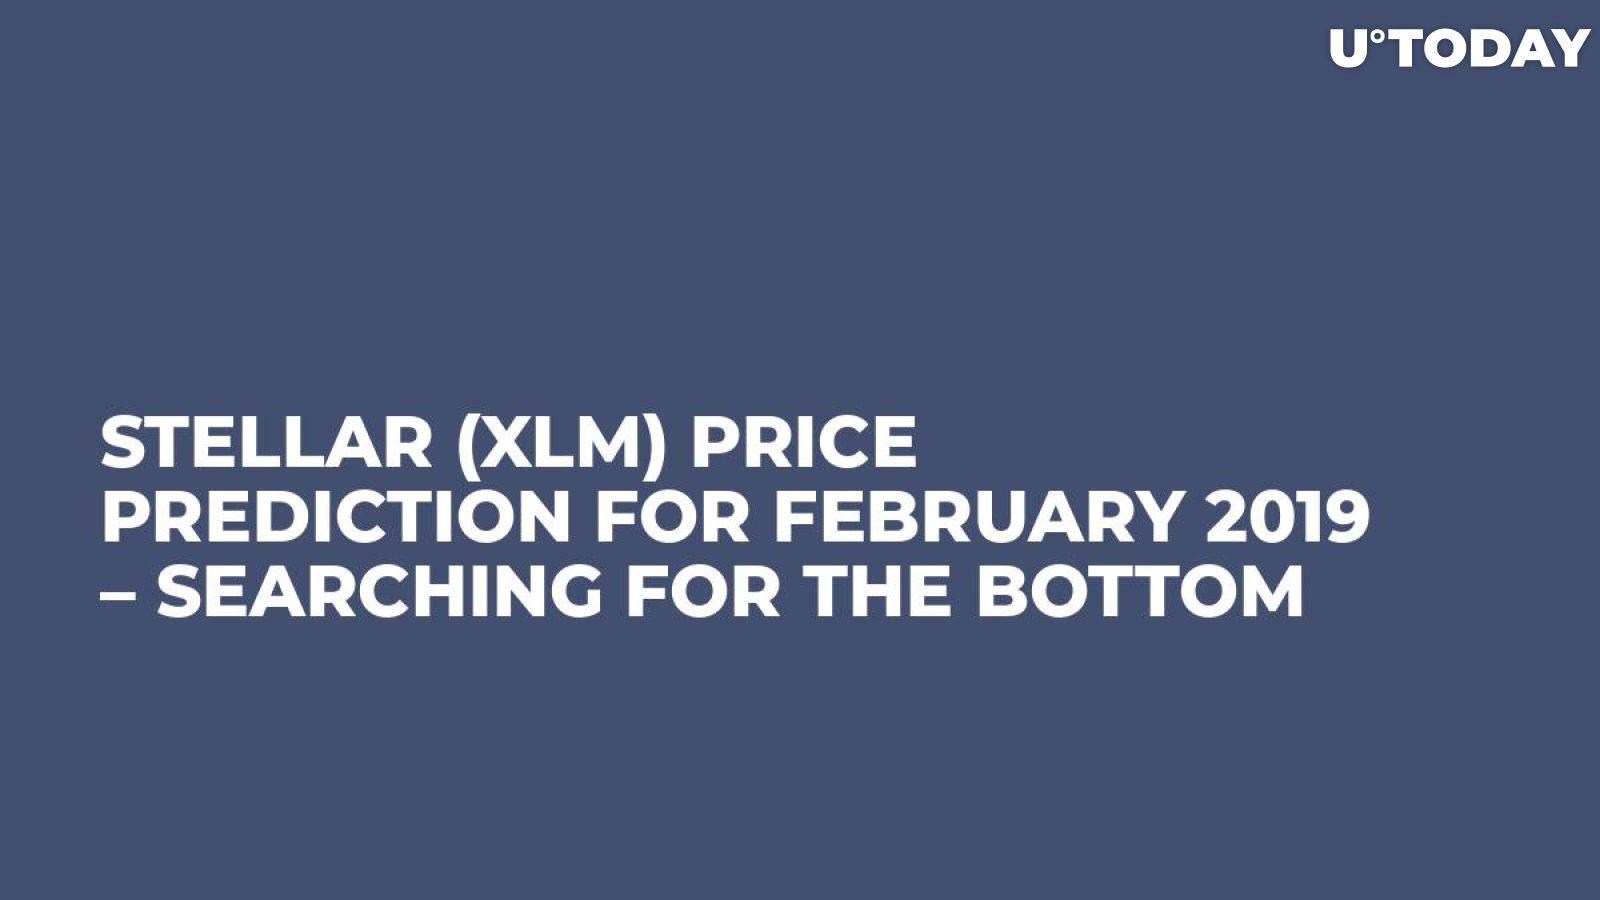 Stellar (XLM) Price Prediction for February 2019 – Searching for the Bottom